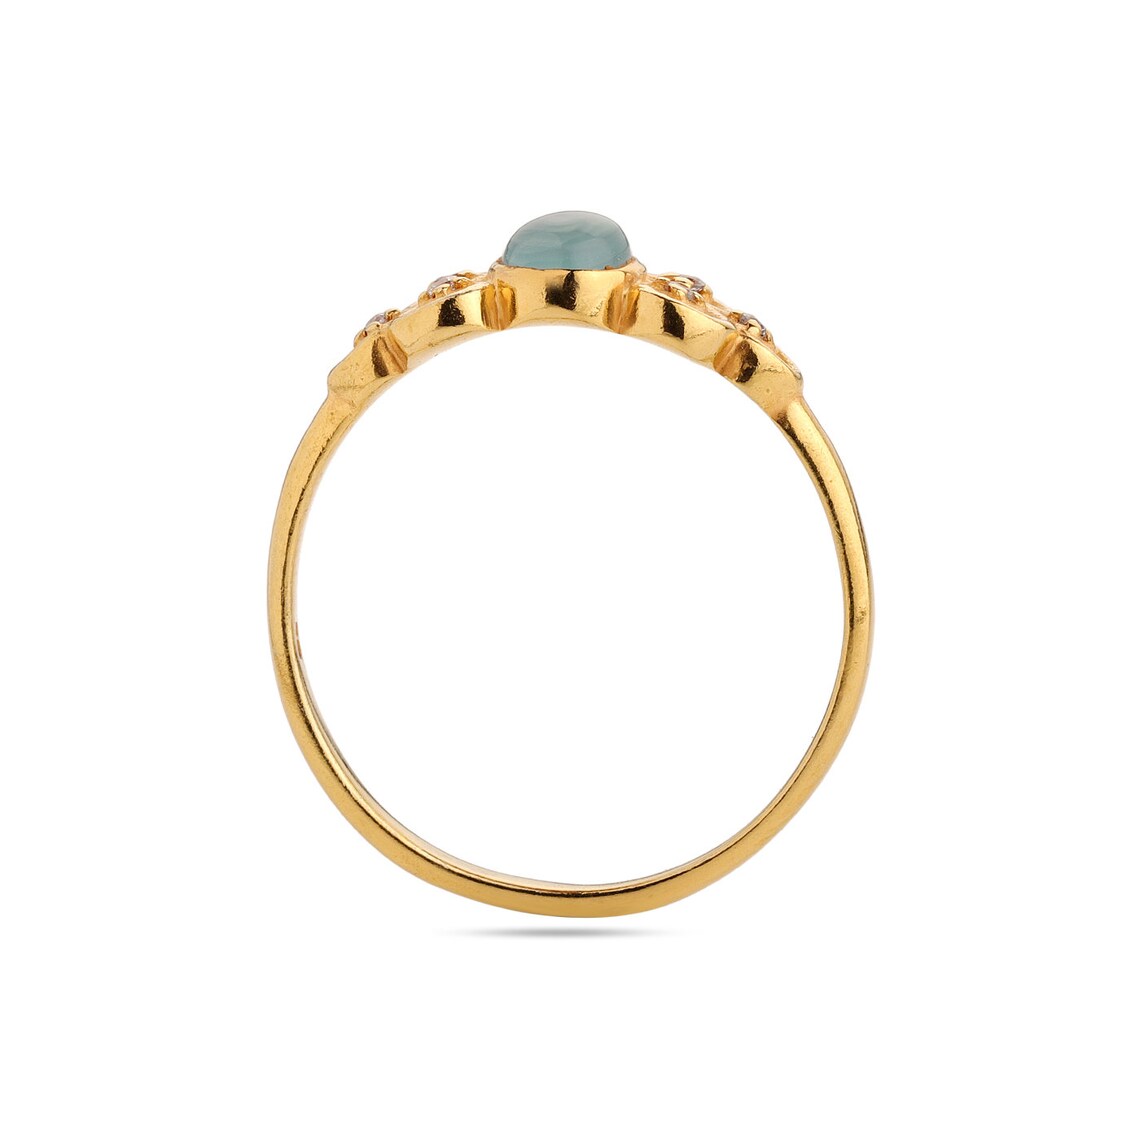 925 Sterling Silver Aqua Chalcedony Ring, Gold Plated ring.